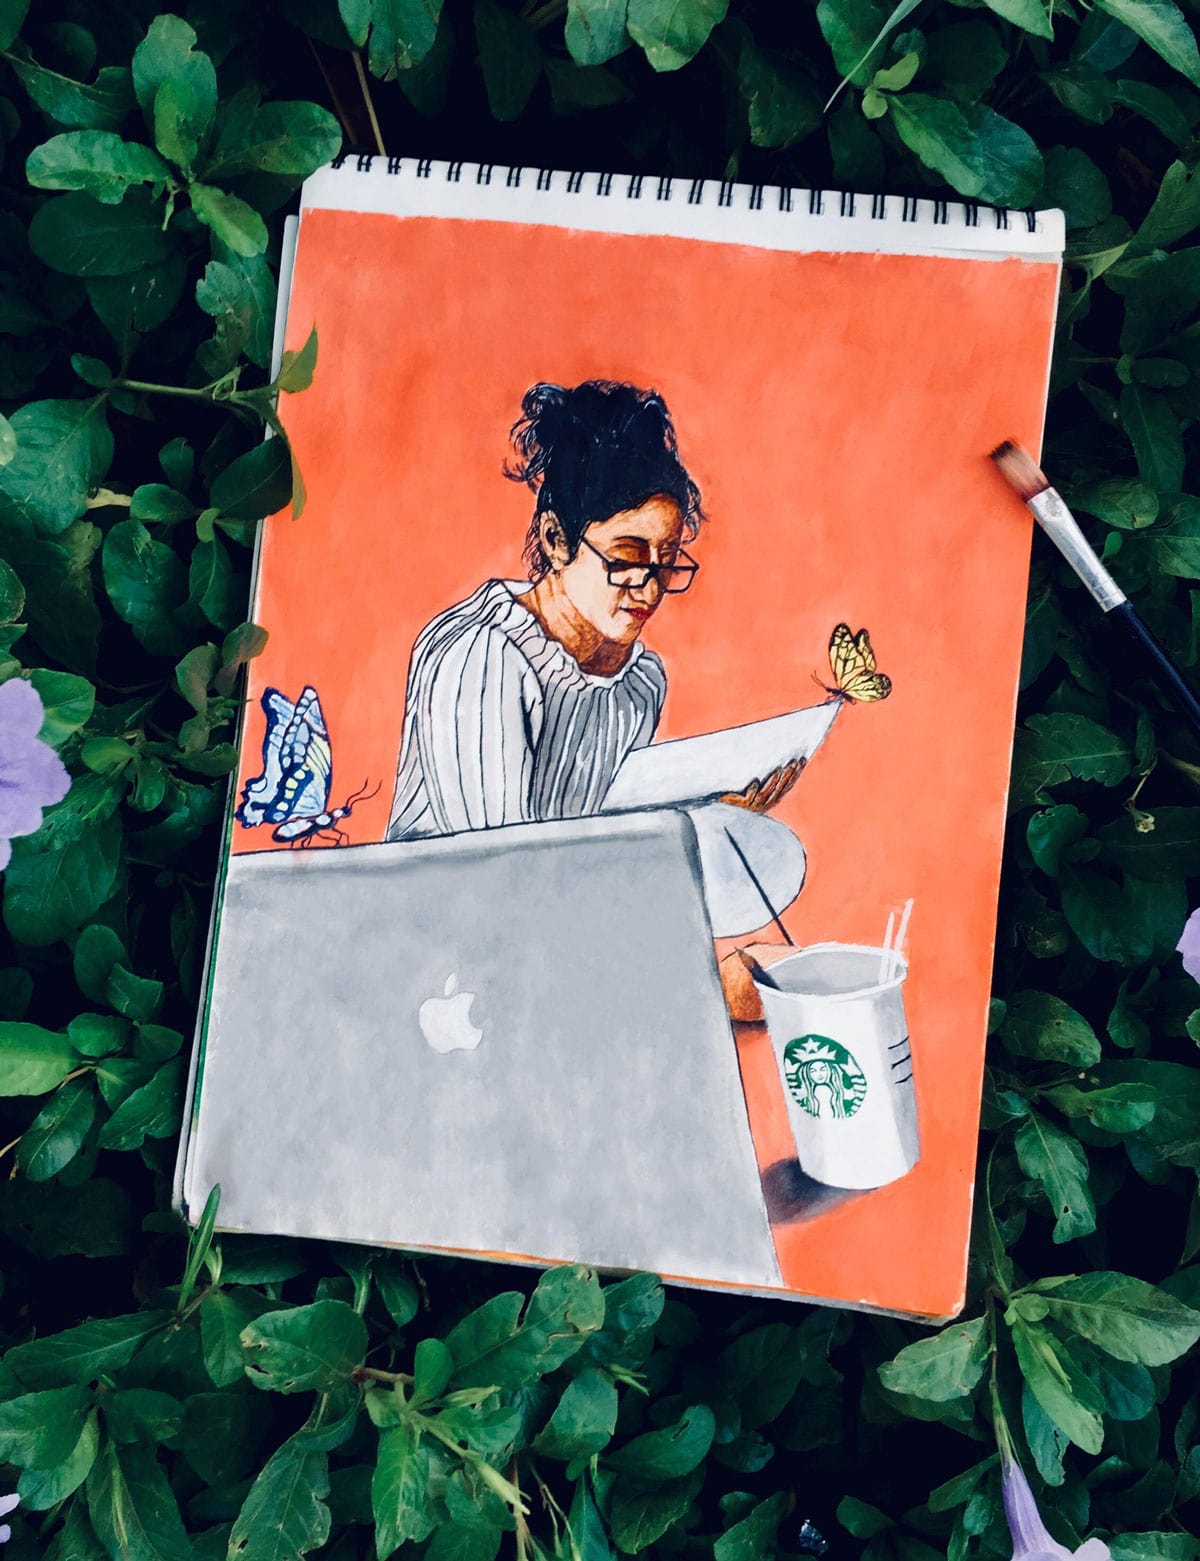 Painting of a girl writing on paper with starbucks cup infront along with a macbook